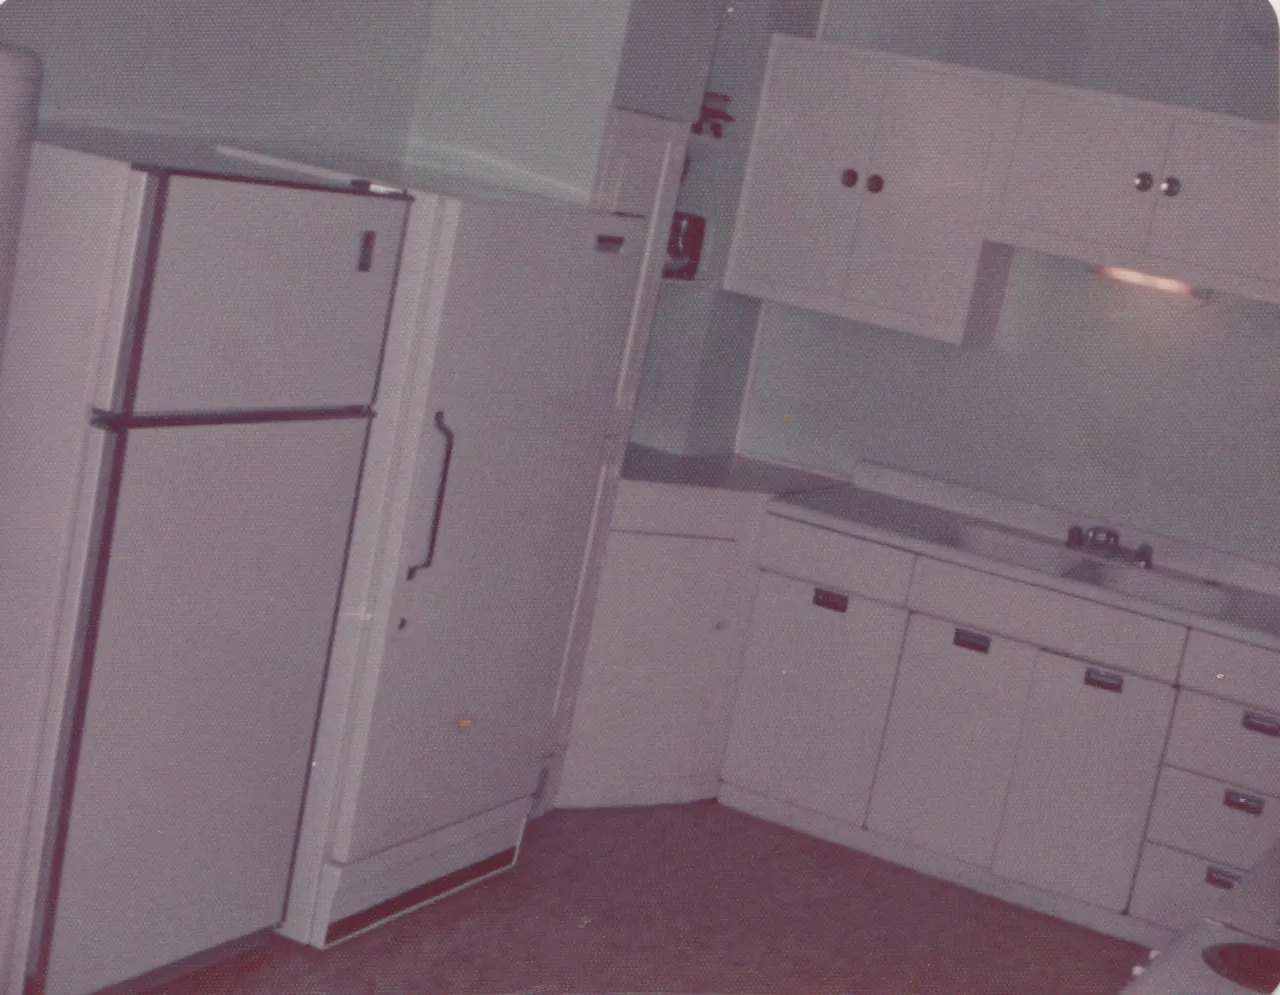 1974-12-02 - Monday - white kitchen, piano with pictures, curtains, bed, no date on these 5pics but probably on or after this date, 5pic-4.png